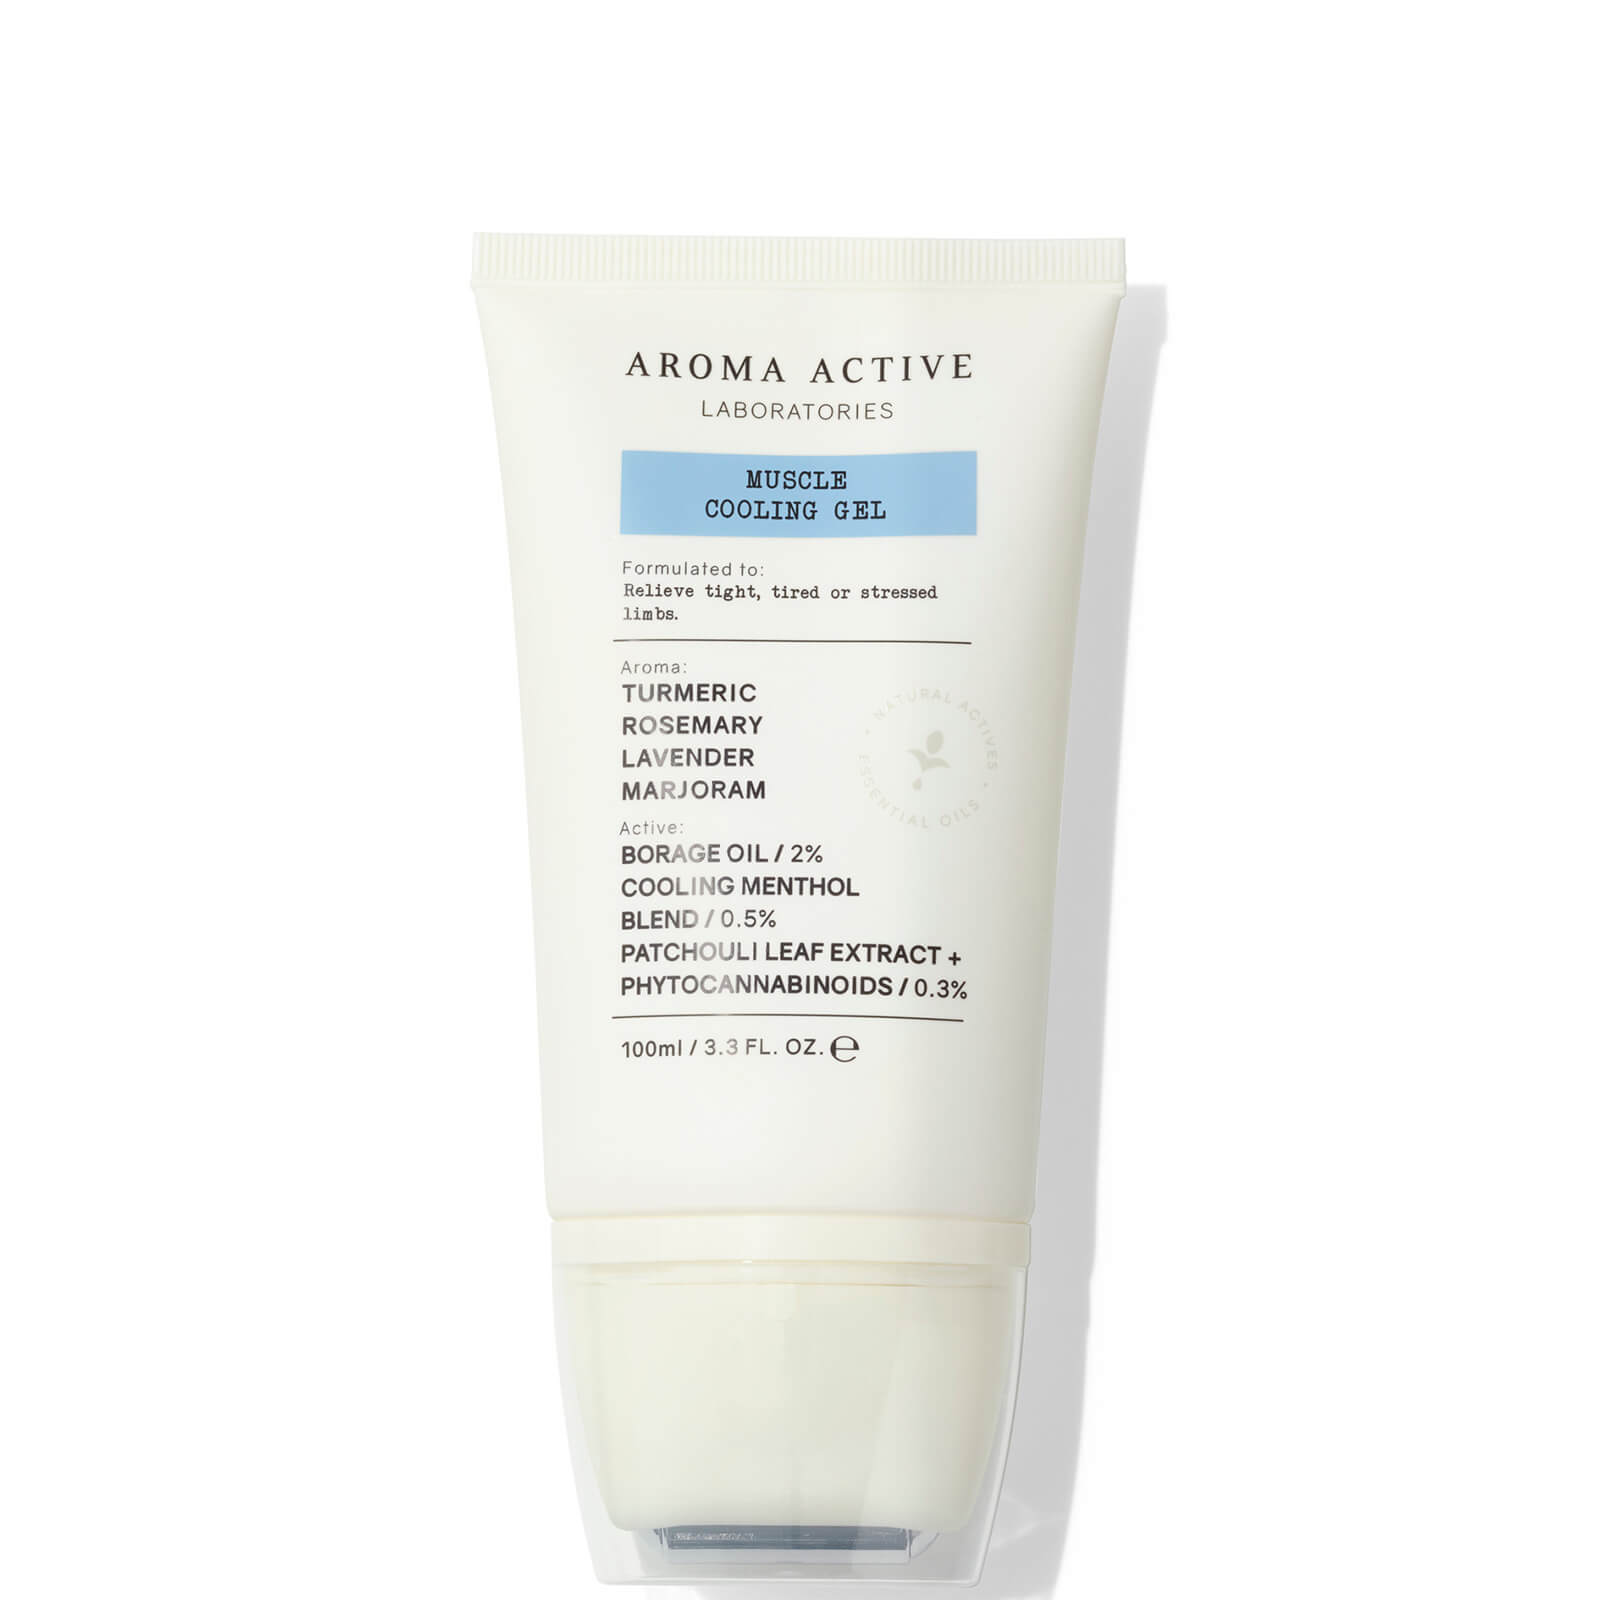 Image of Aroma Active Muscle Cooling Gel 100ml